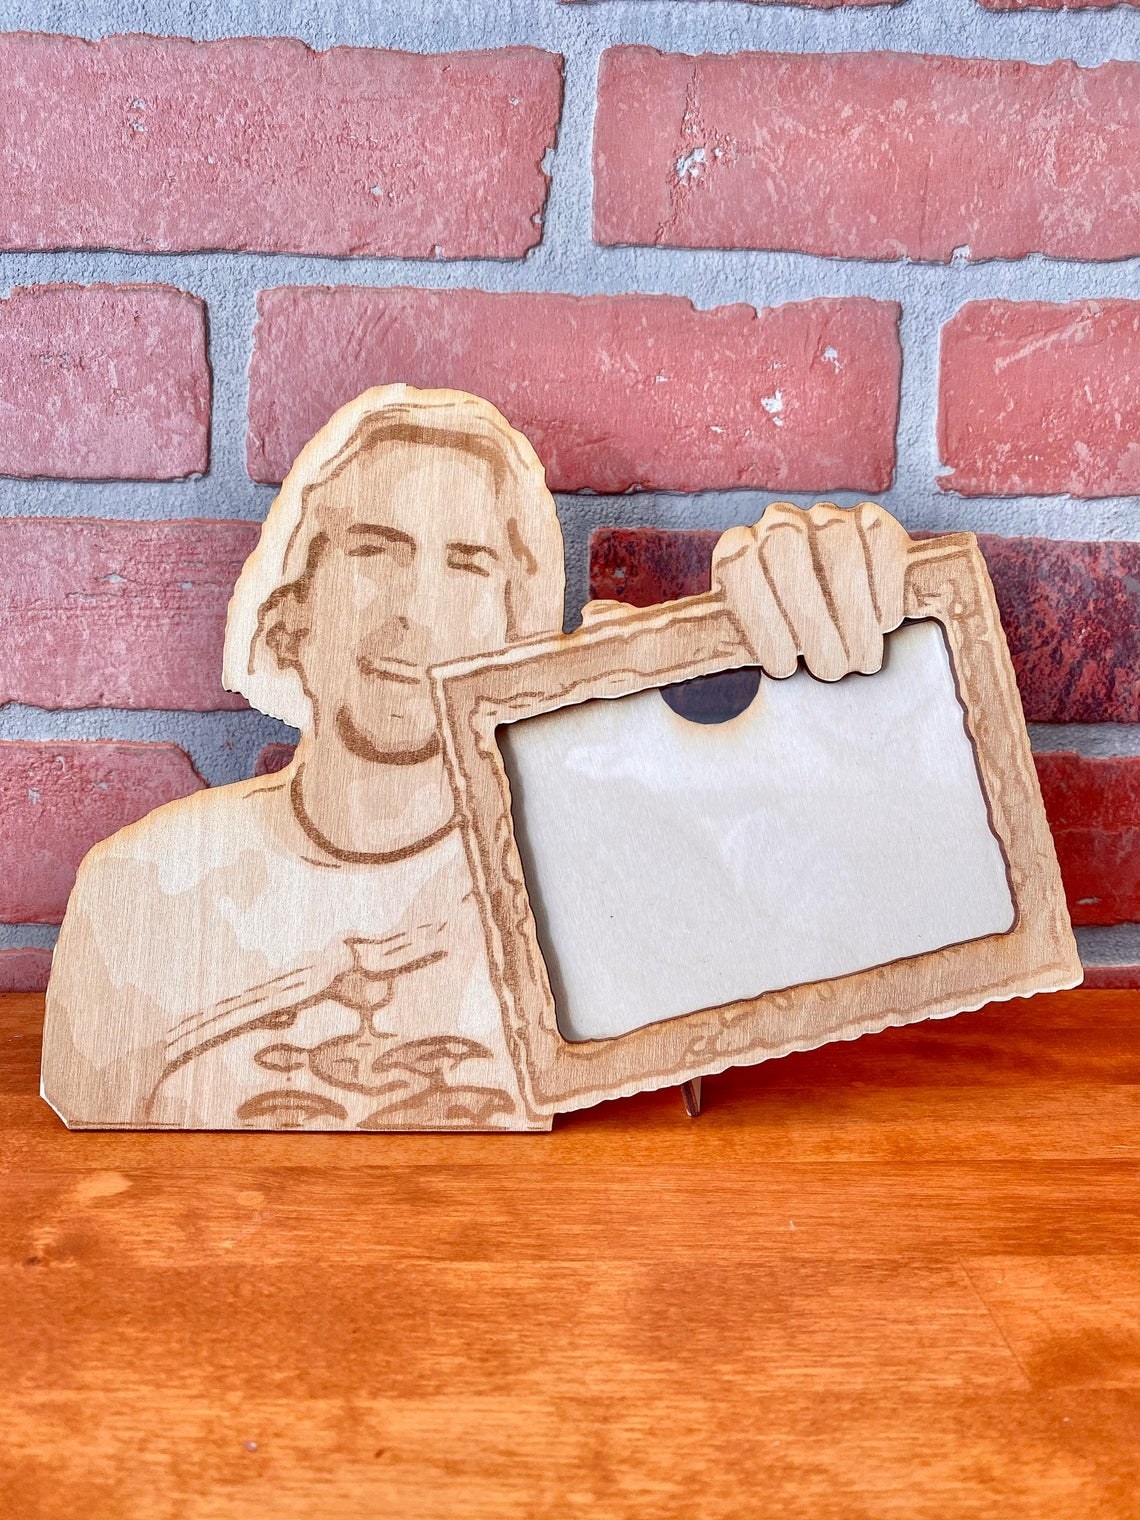 wood frame shaped like the meme of nickelback singer saying look at this photograph